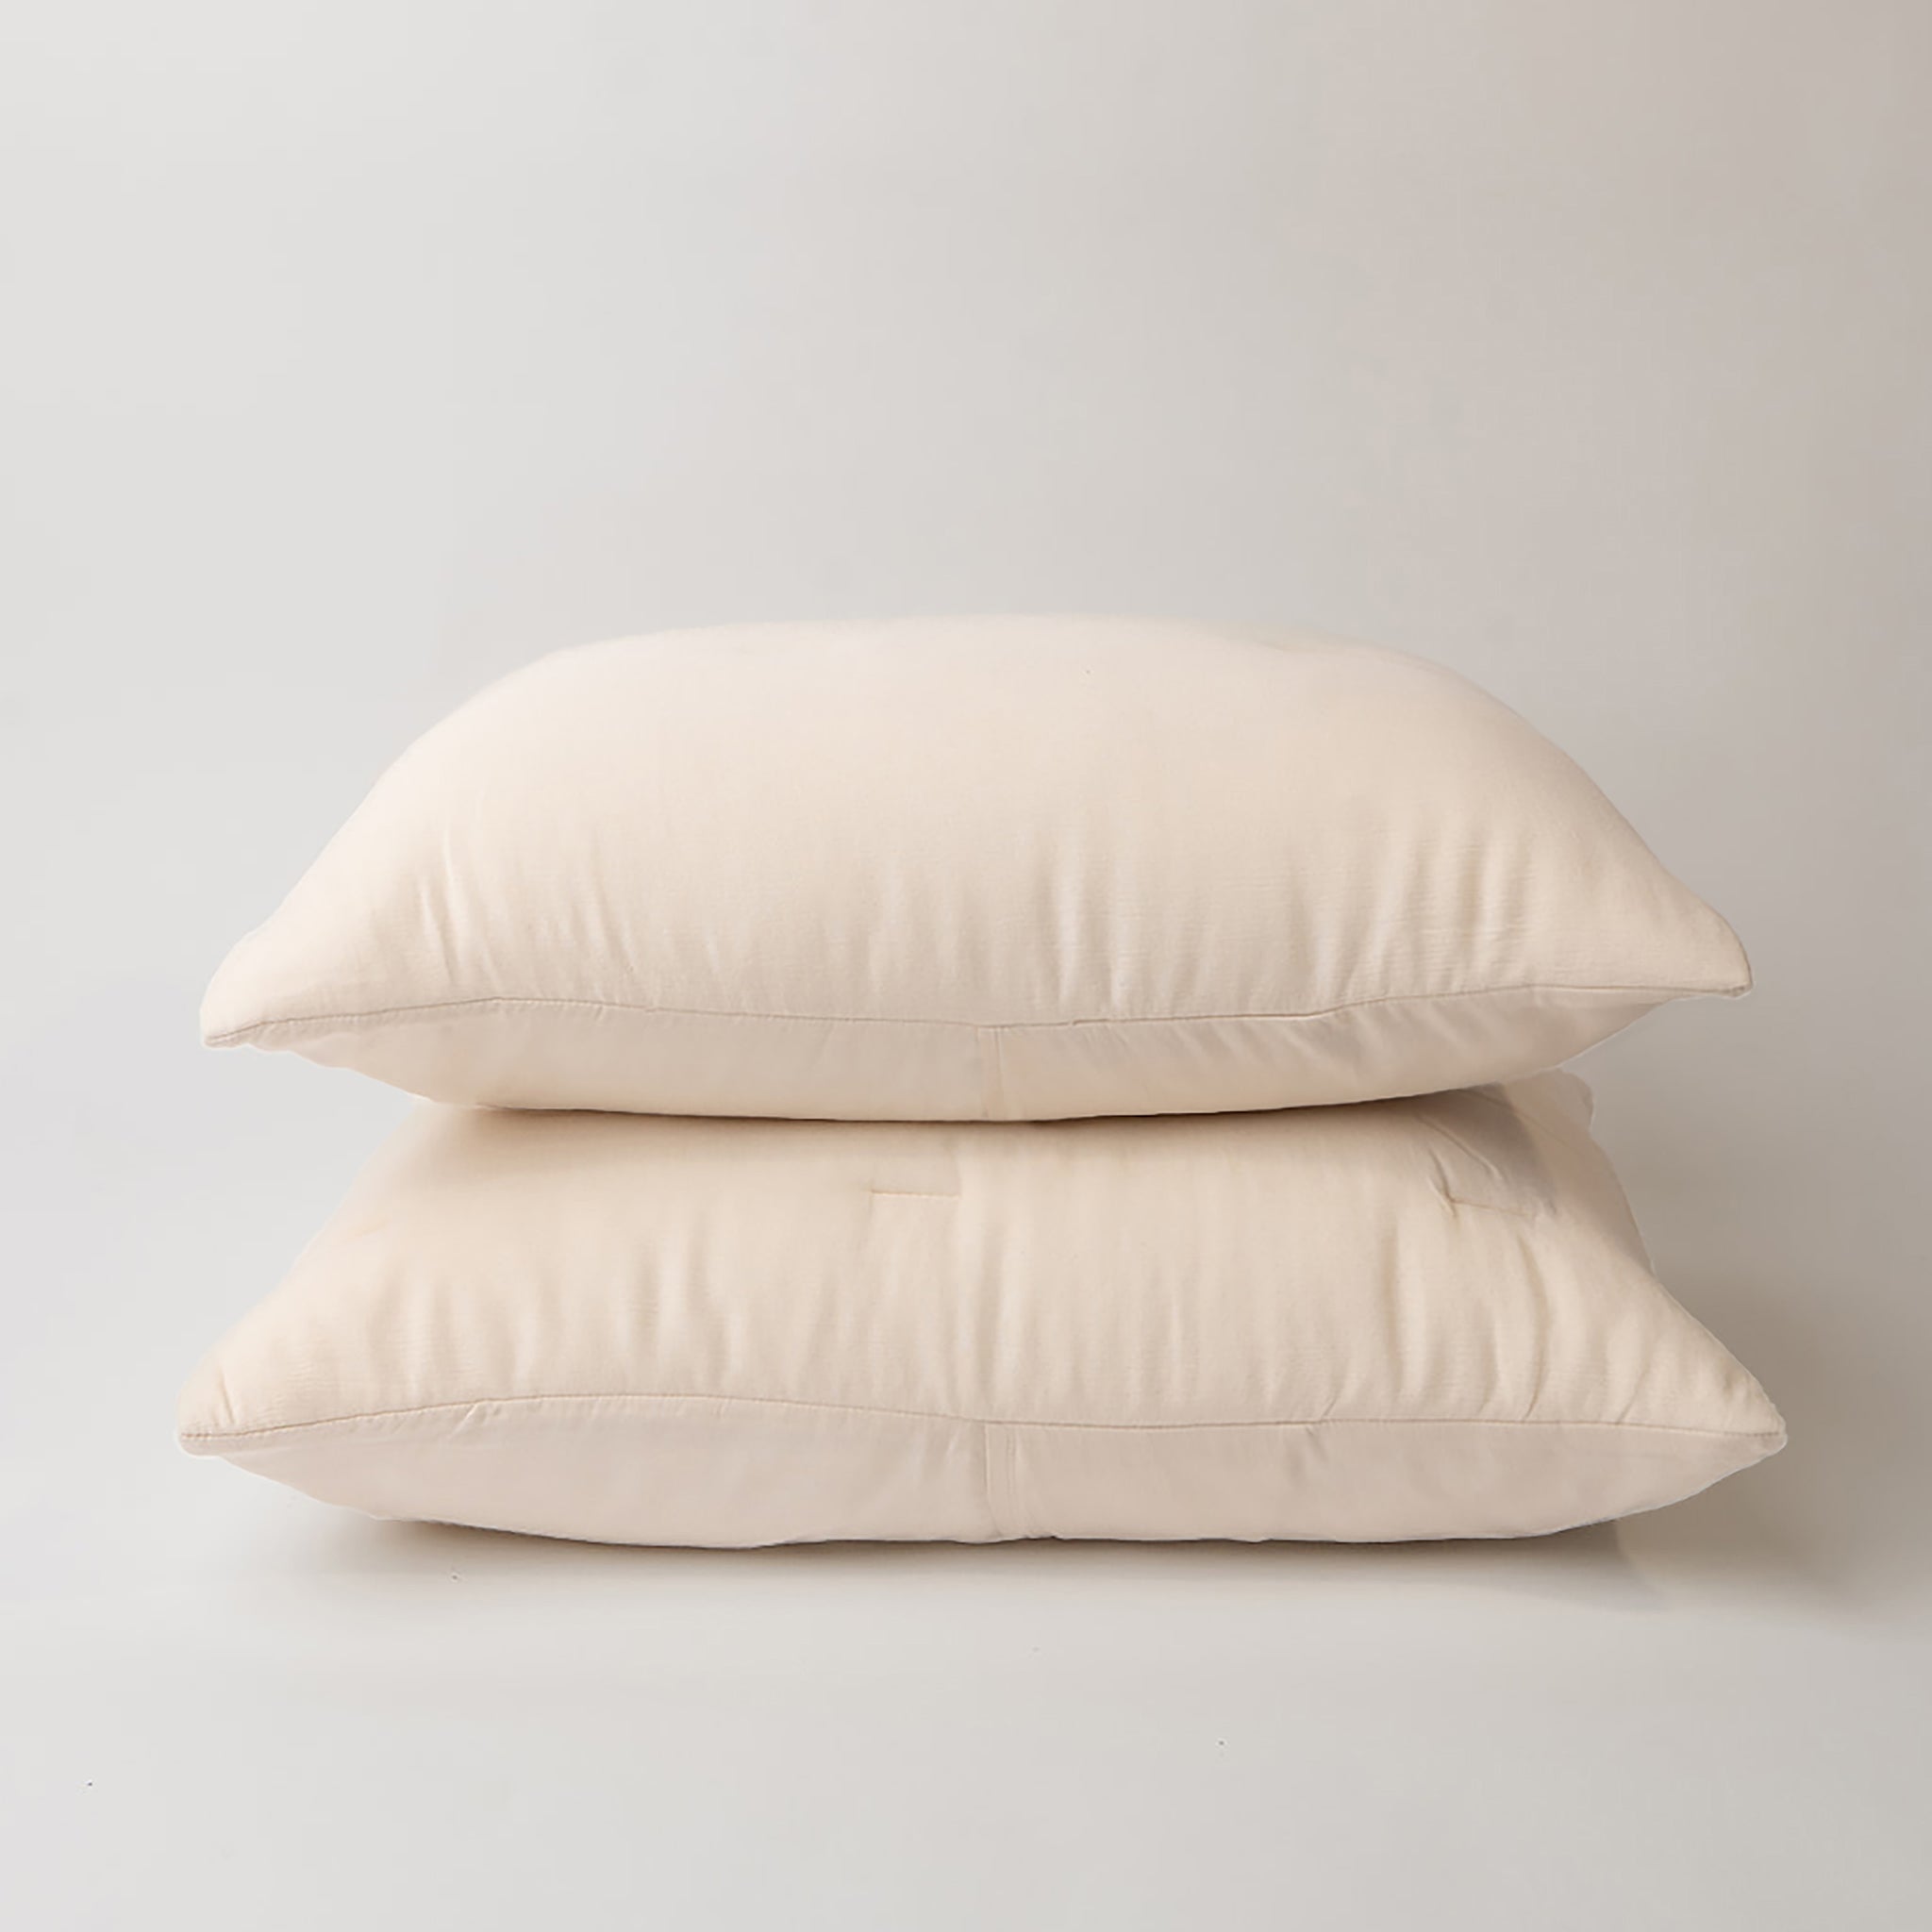 Buttermilk Aire Bamboo Puckered Shams king size. The sham is resting on a white background|Color:Buttermilk|Style:King